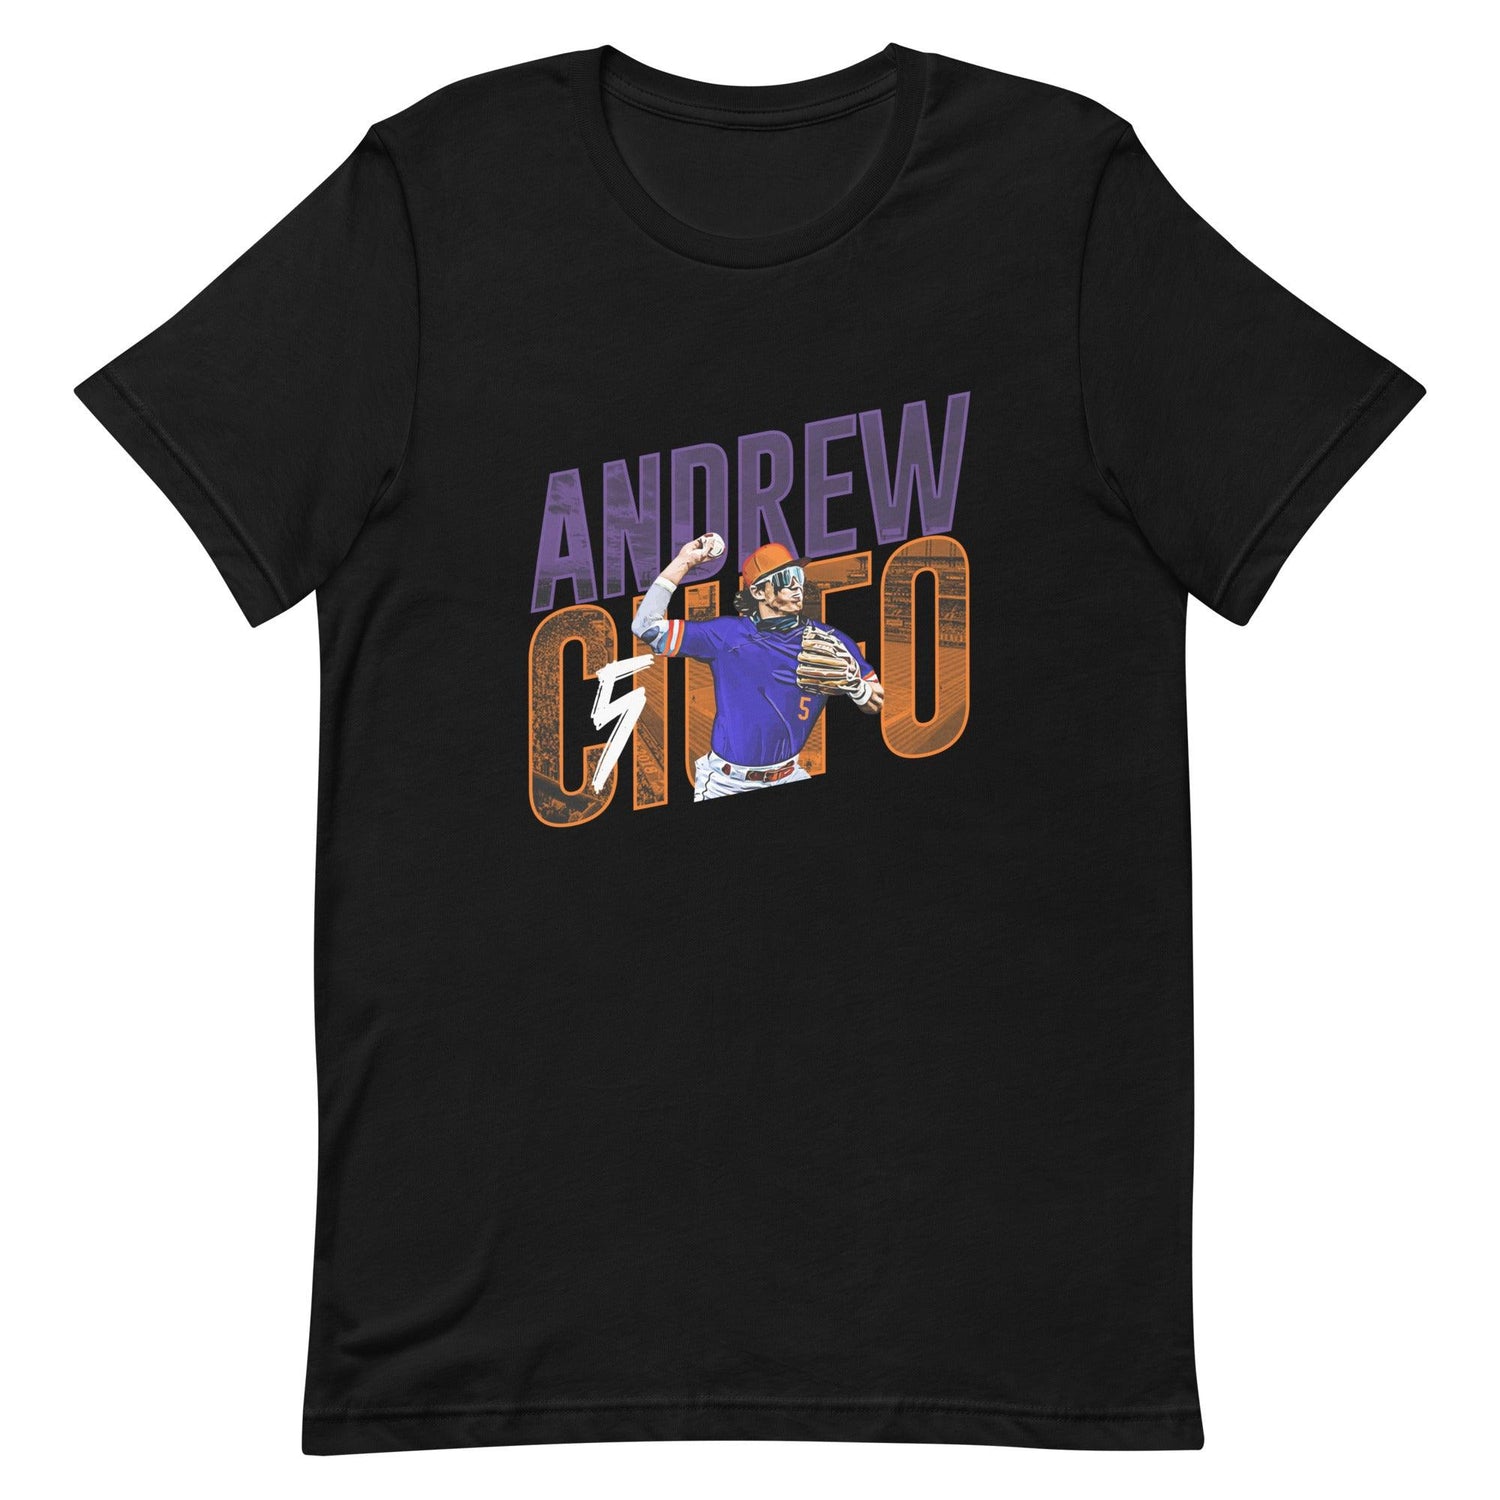 Andrew Ciufo "Gameday" t-shirt - Fan Arch